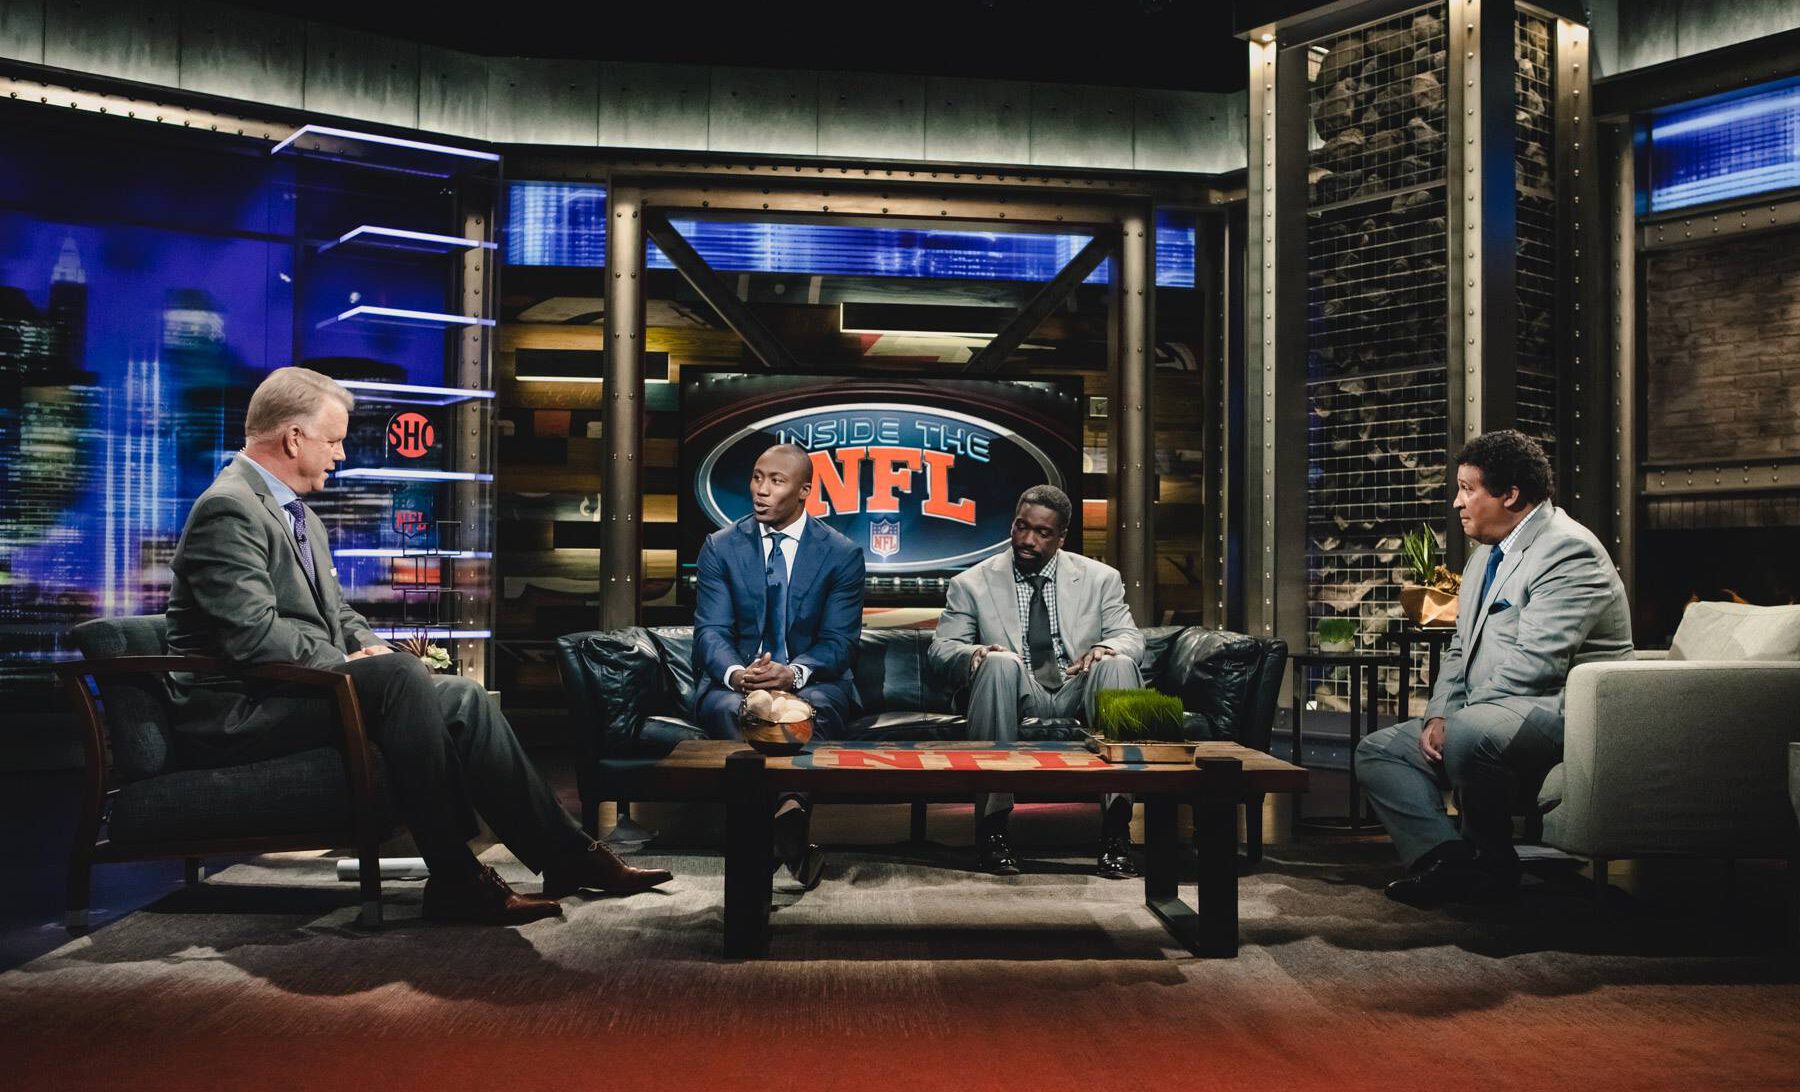 Brandon Marshall in an interview at the NFL showtime